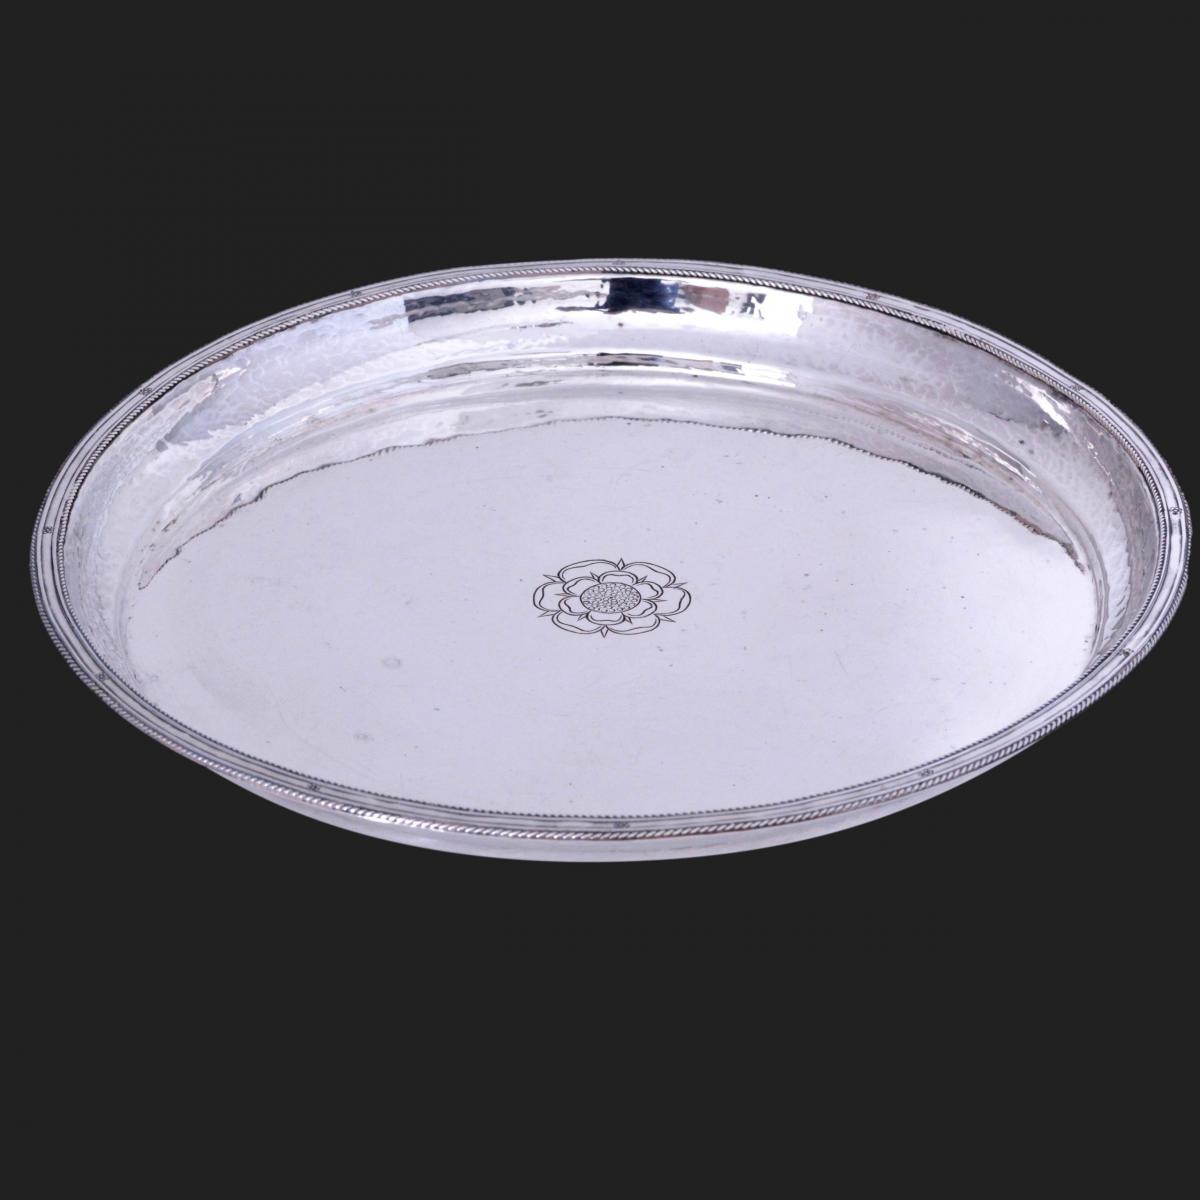 Artificers Guild silver tray